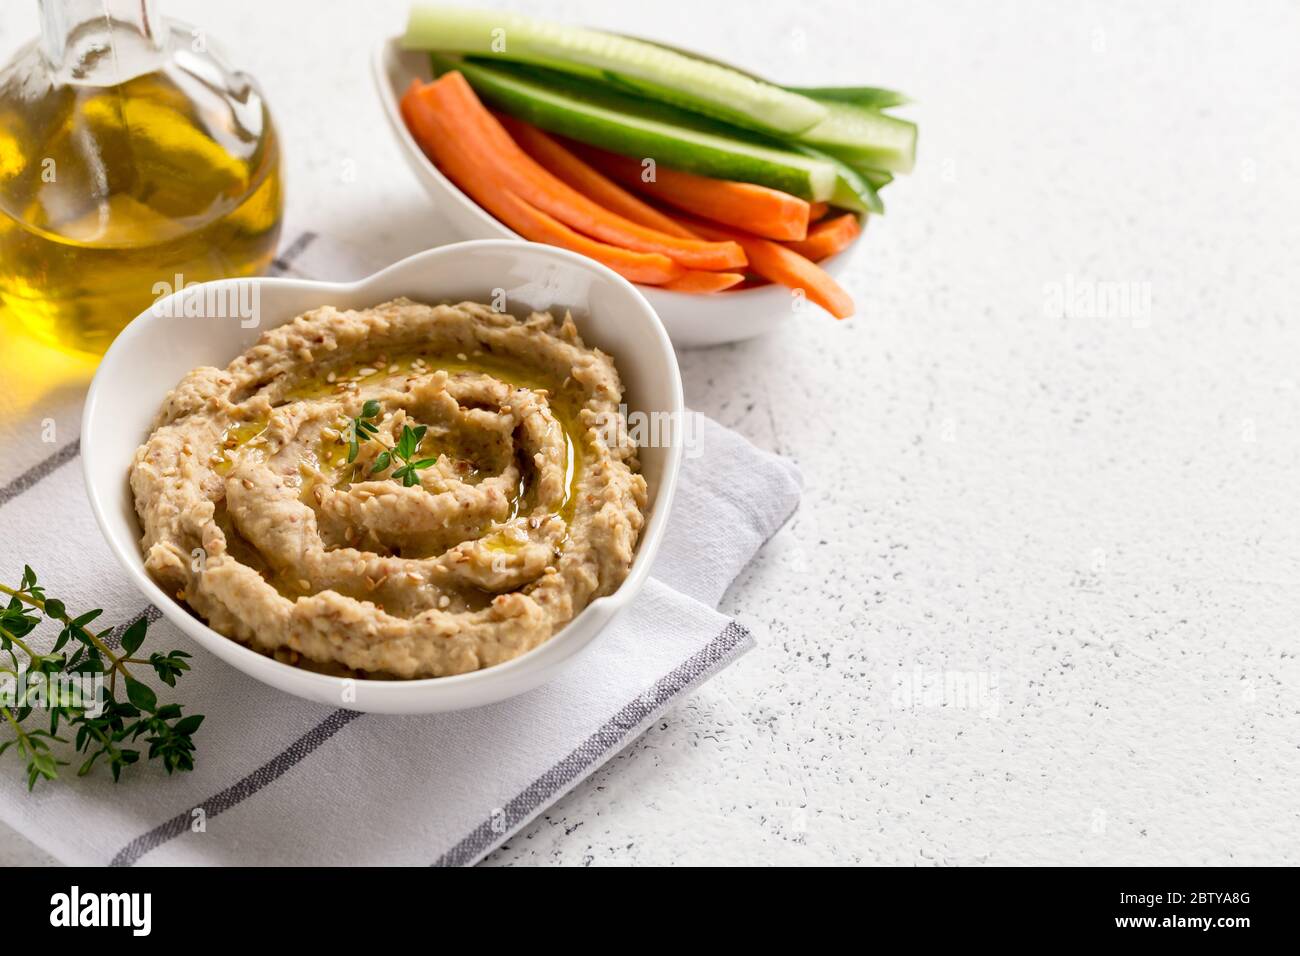 hummus sauce in a bowl, sesame seeds, olive oil, cucumber and carrots on a light background Stock Photo